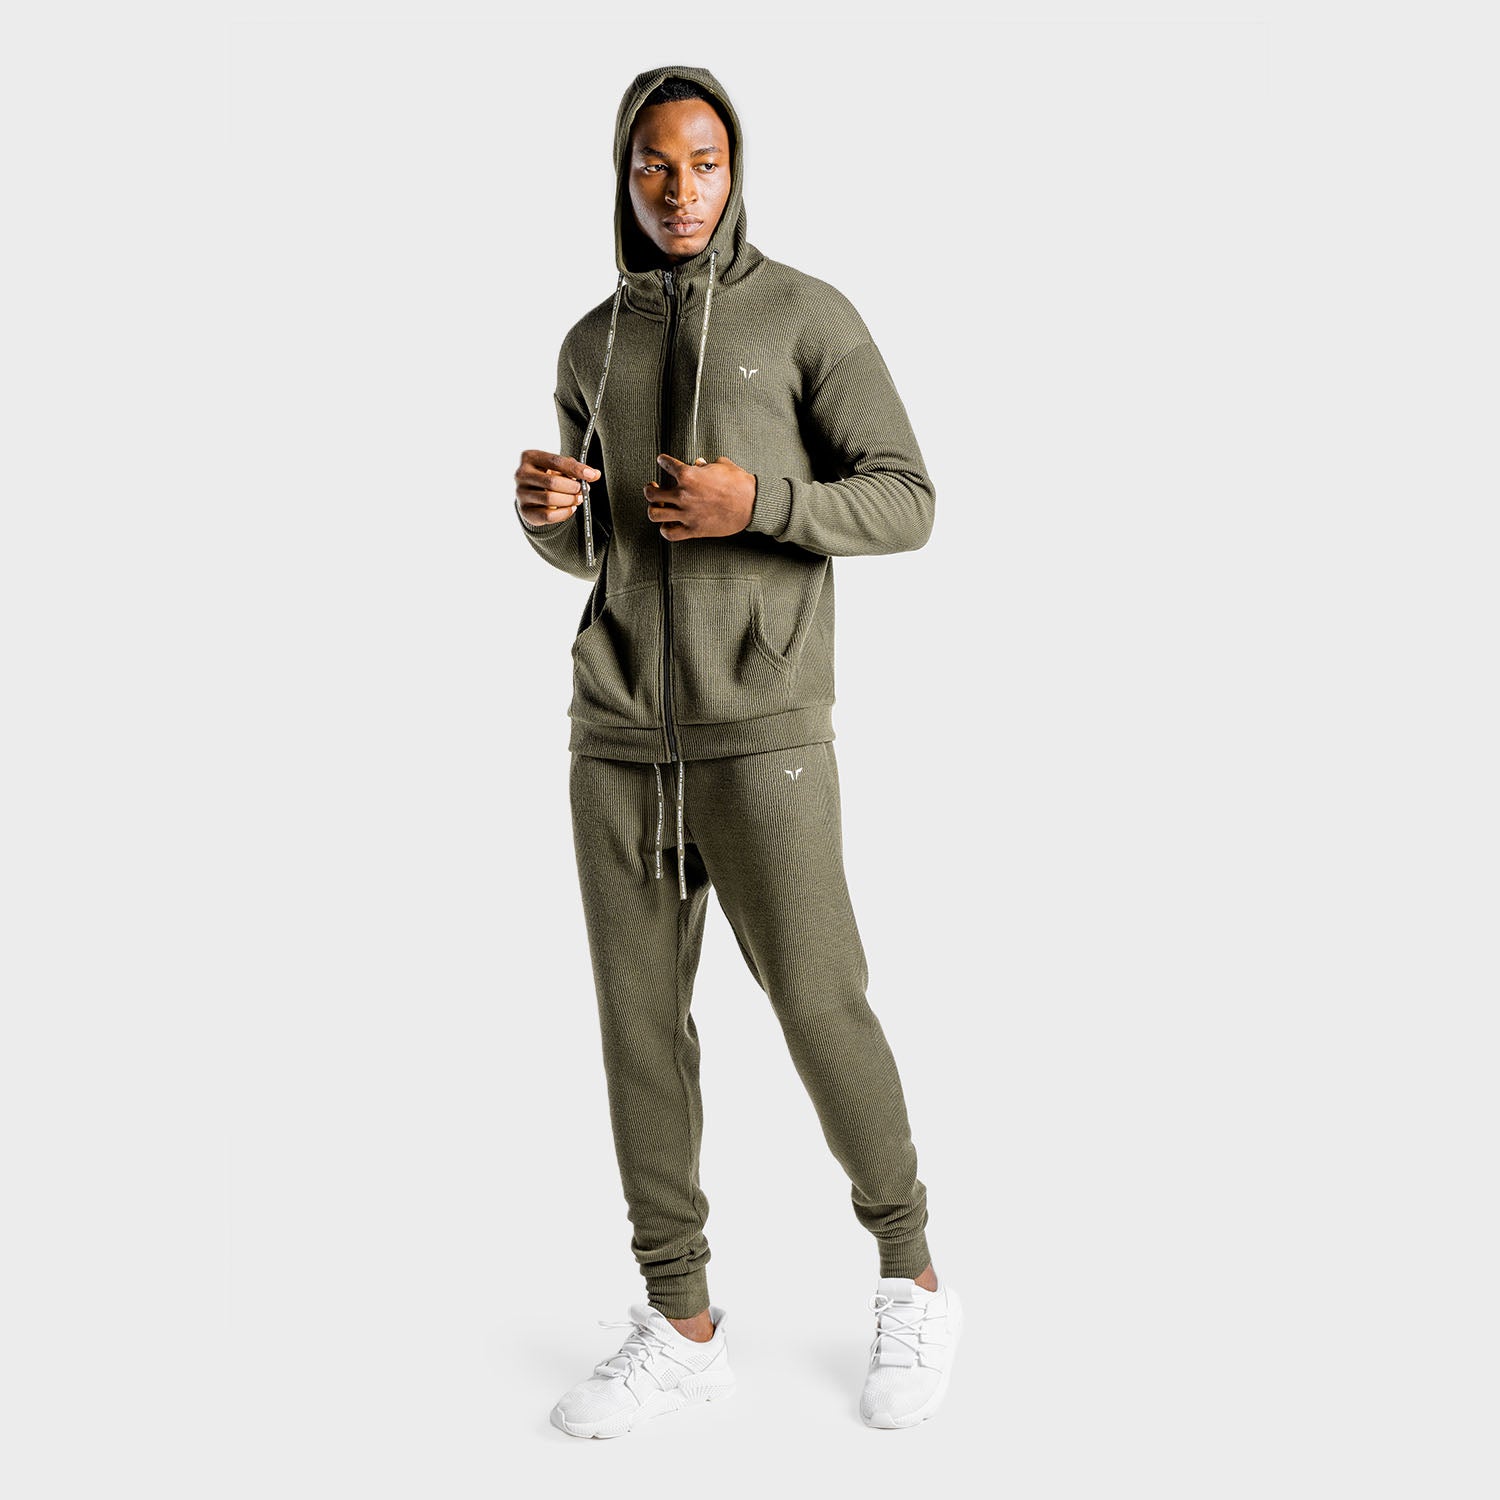 squatwolf-workout-hoodies-for-men-luxe-zip-up-olive-gym-wear